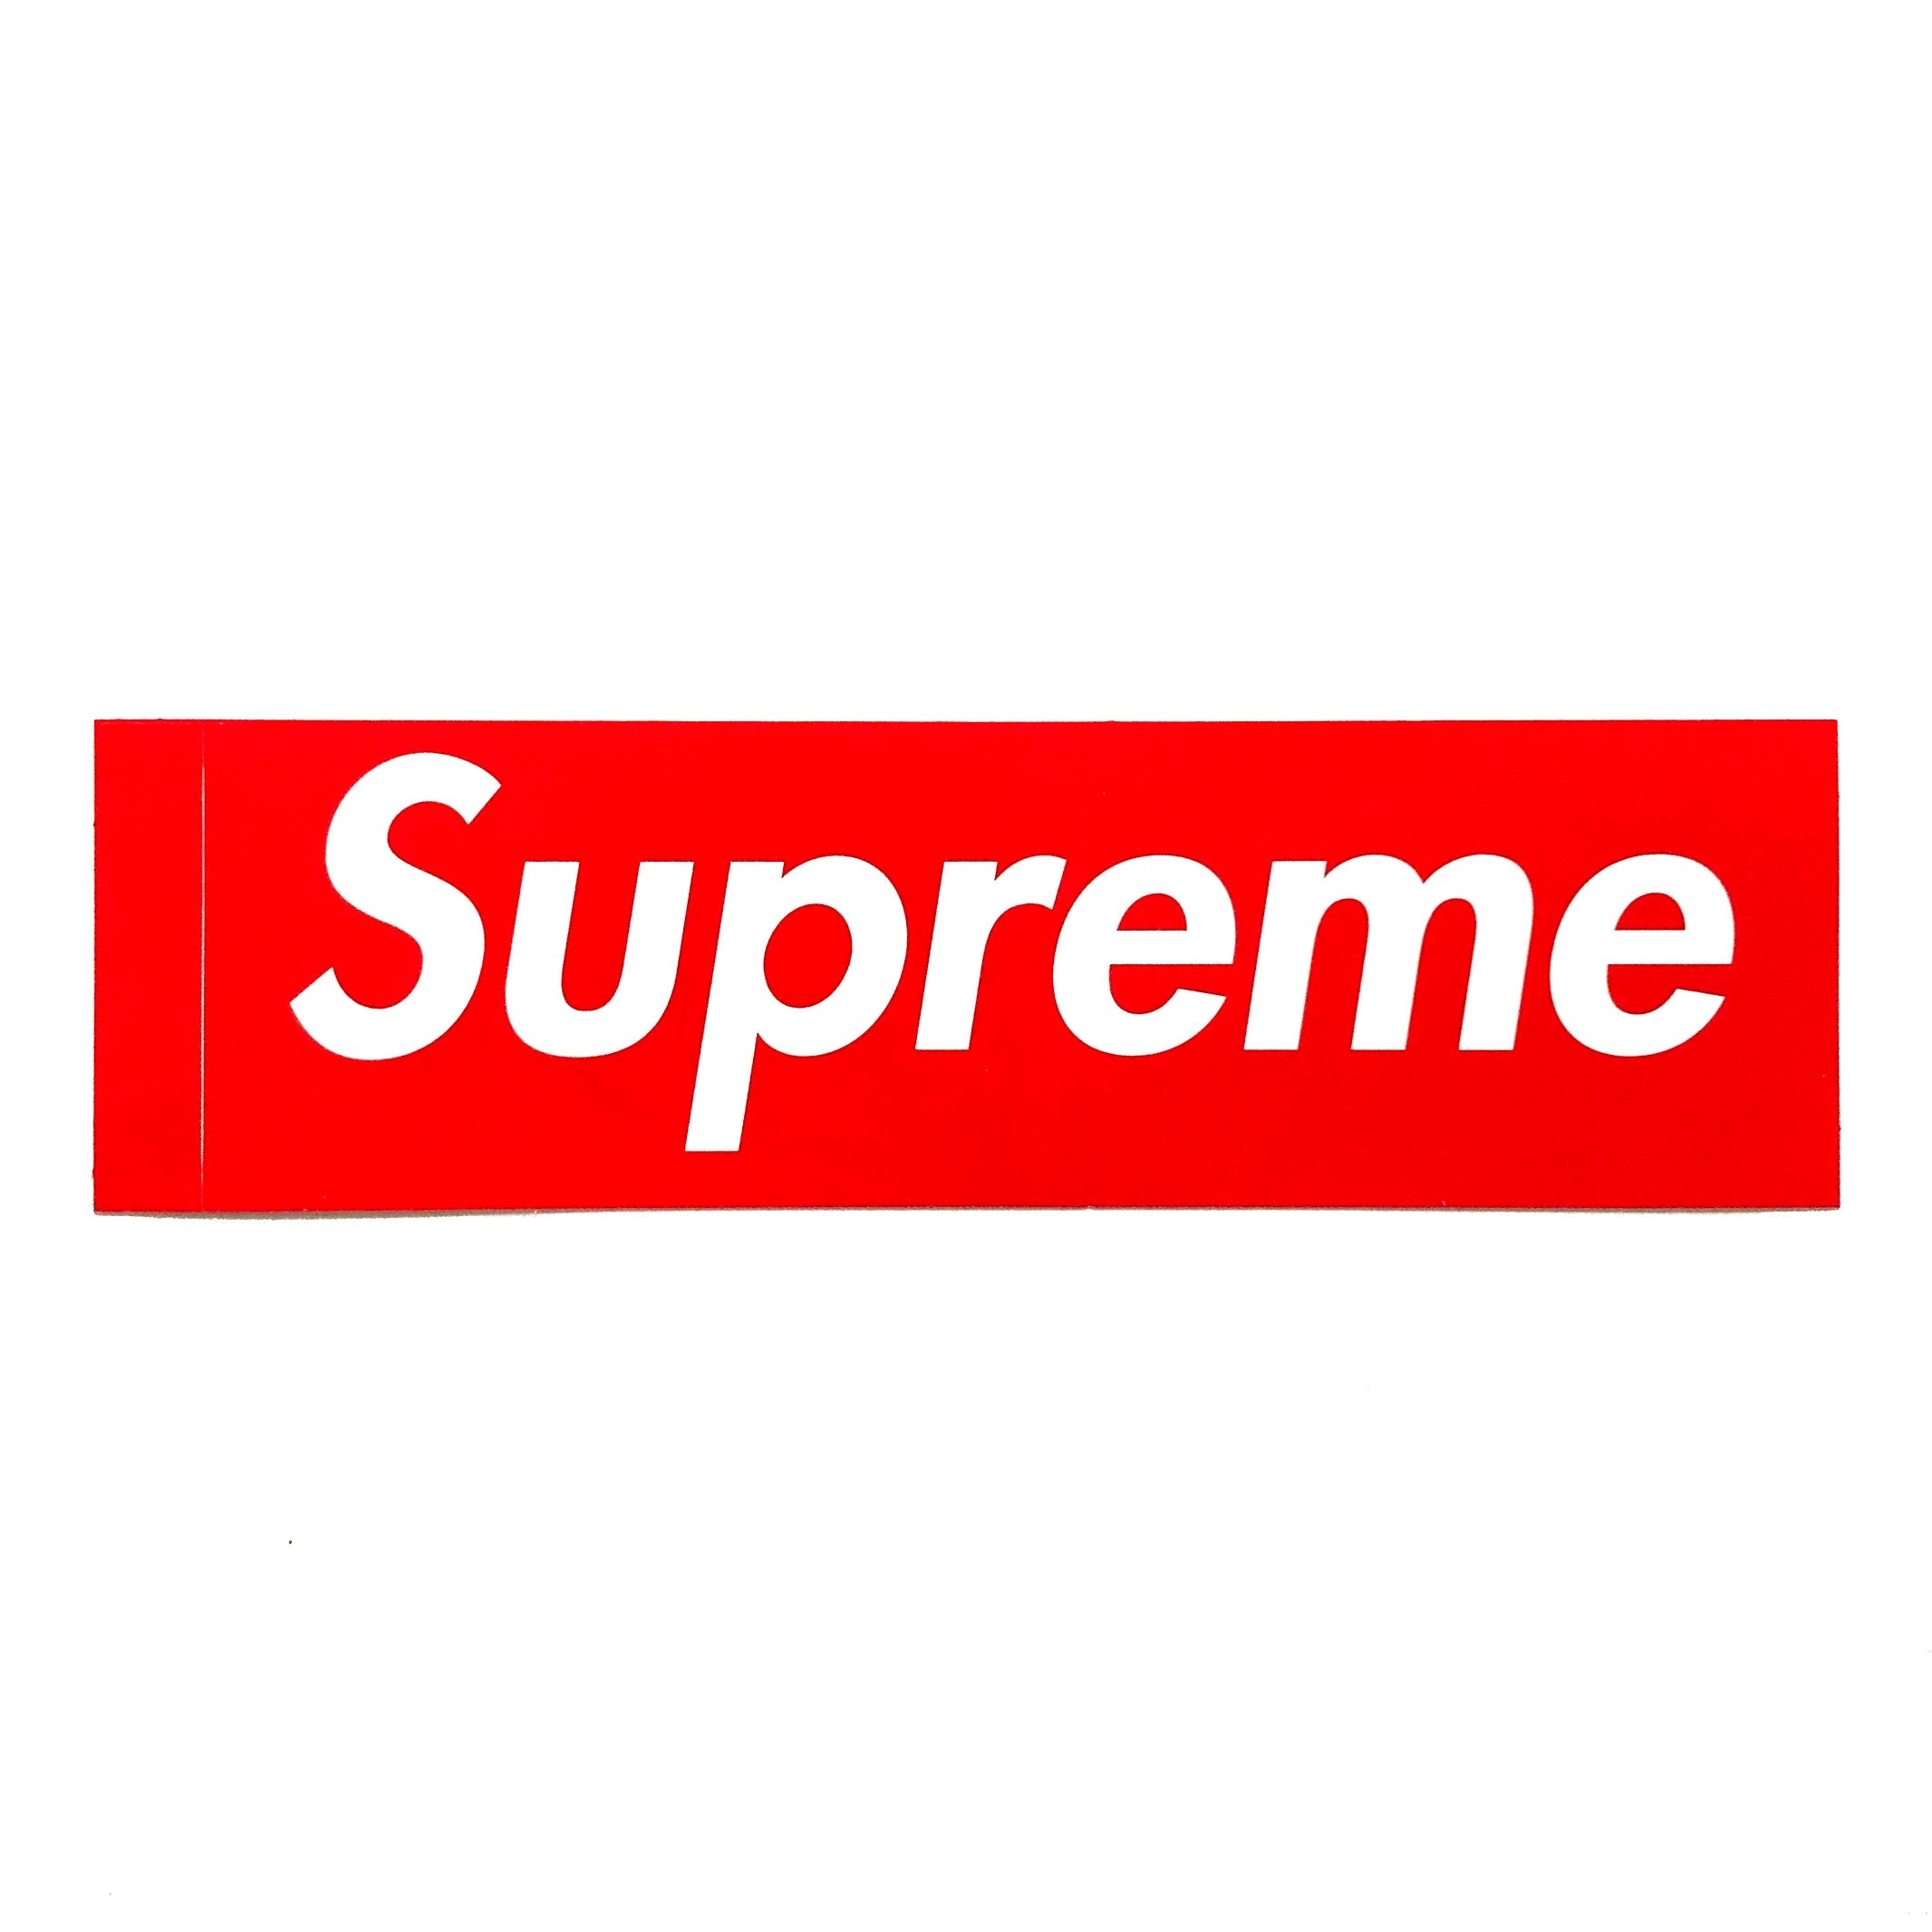 Supreme Red Box-Logo Sticker 100% Authentic Brand New Fast Shipping 